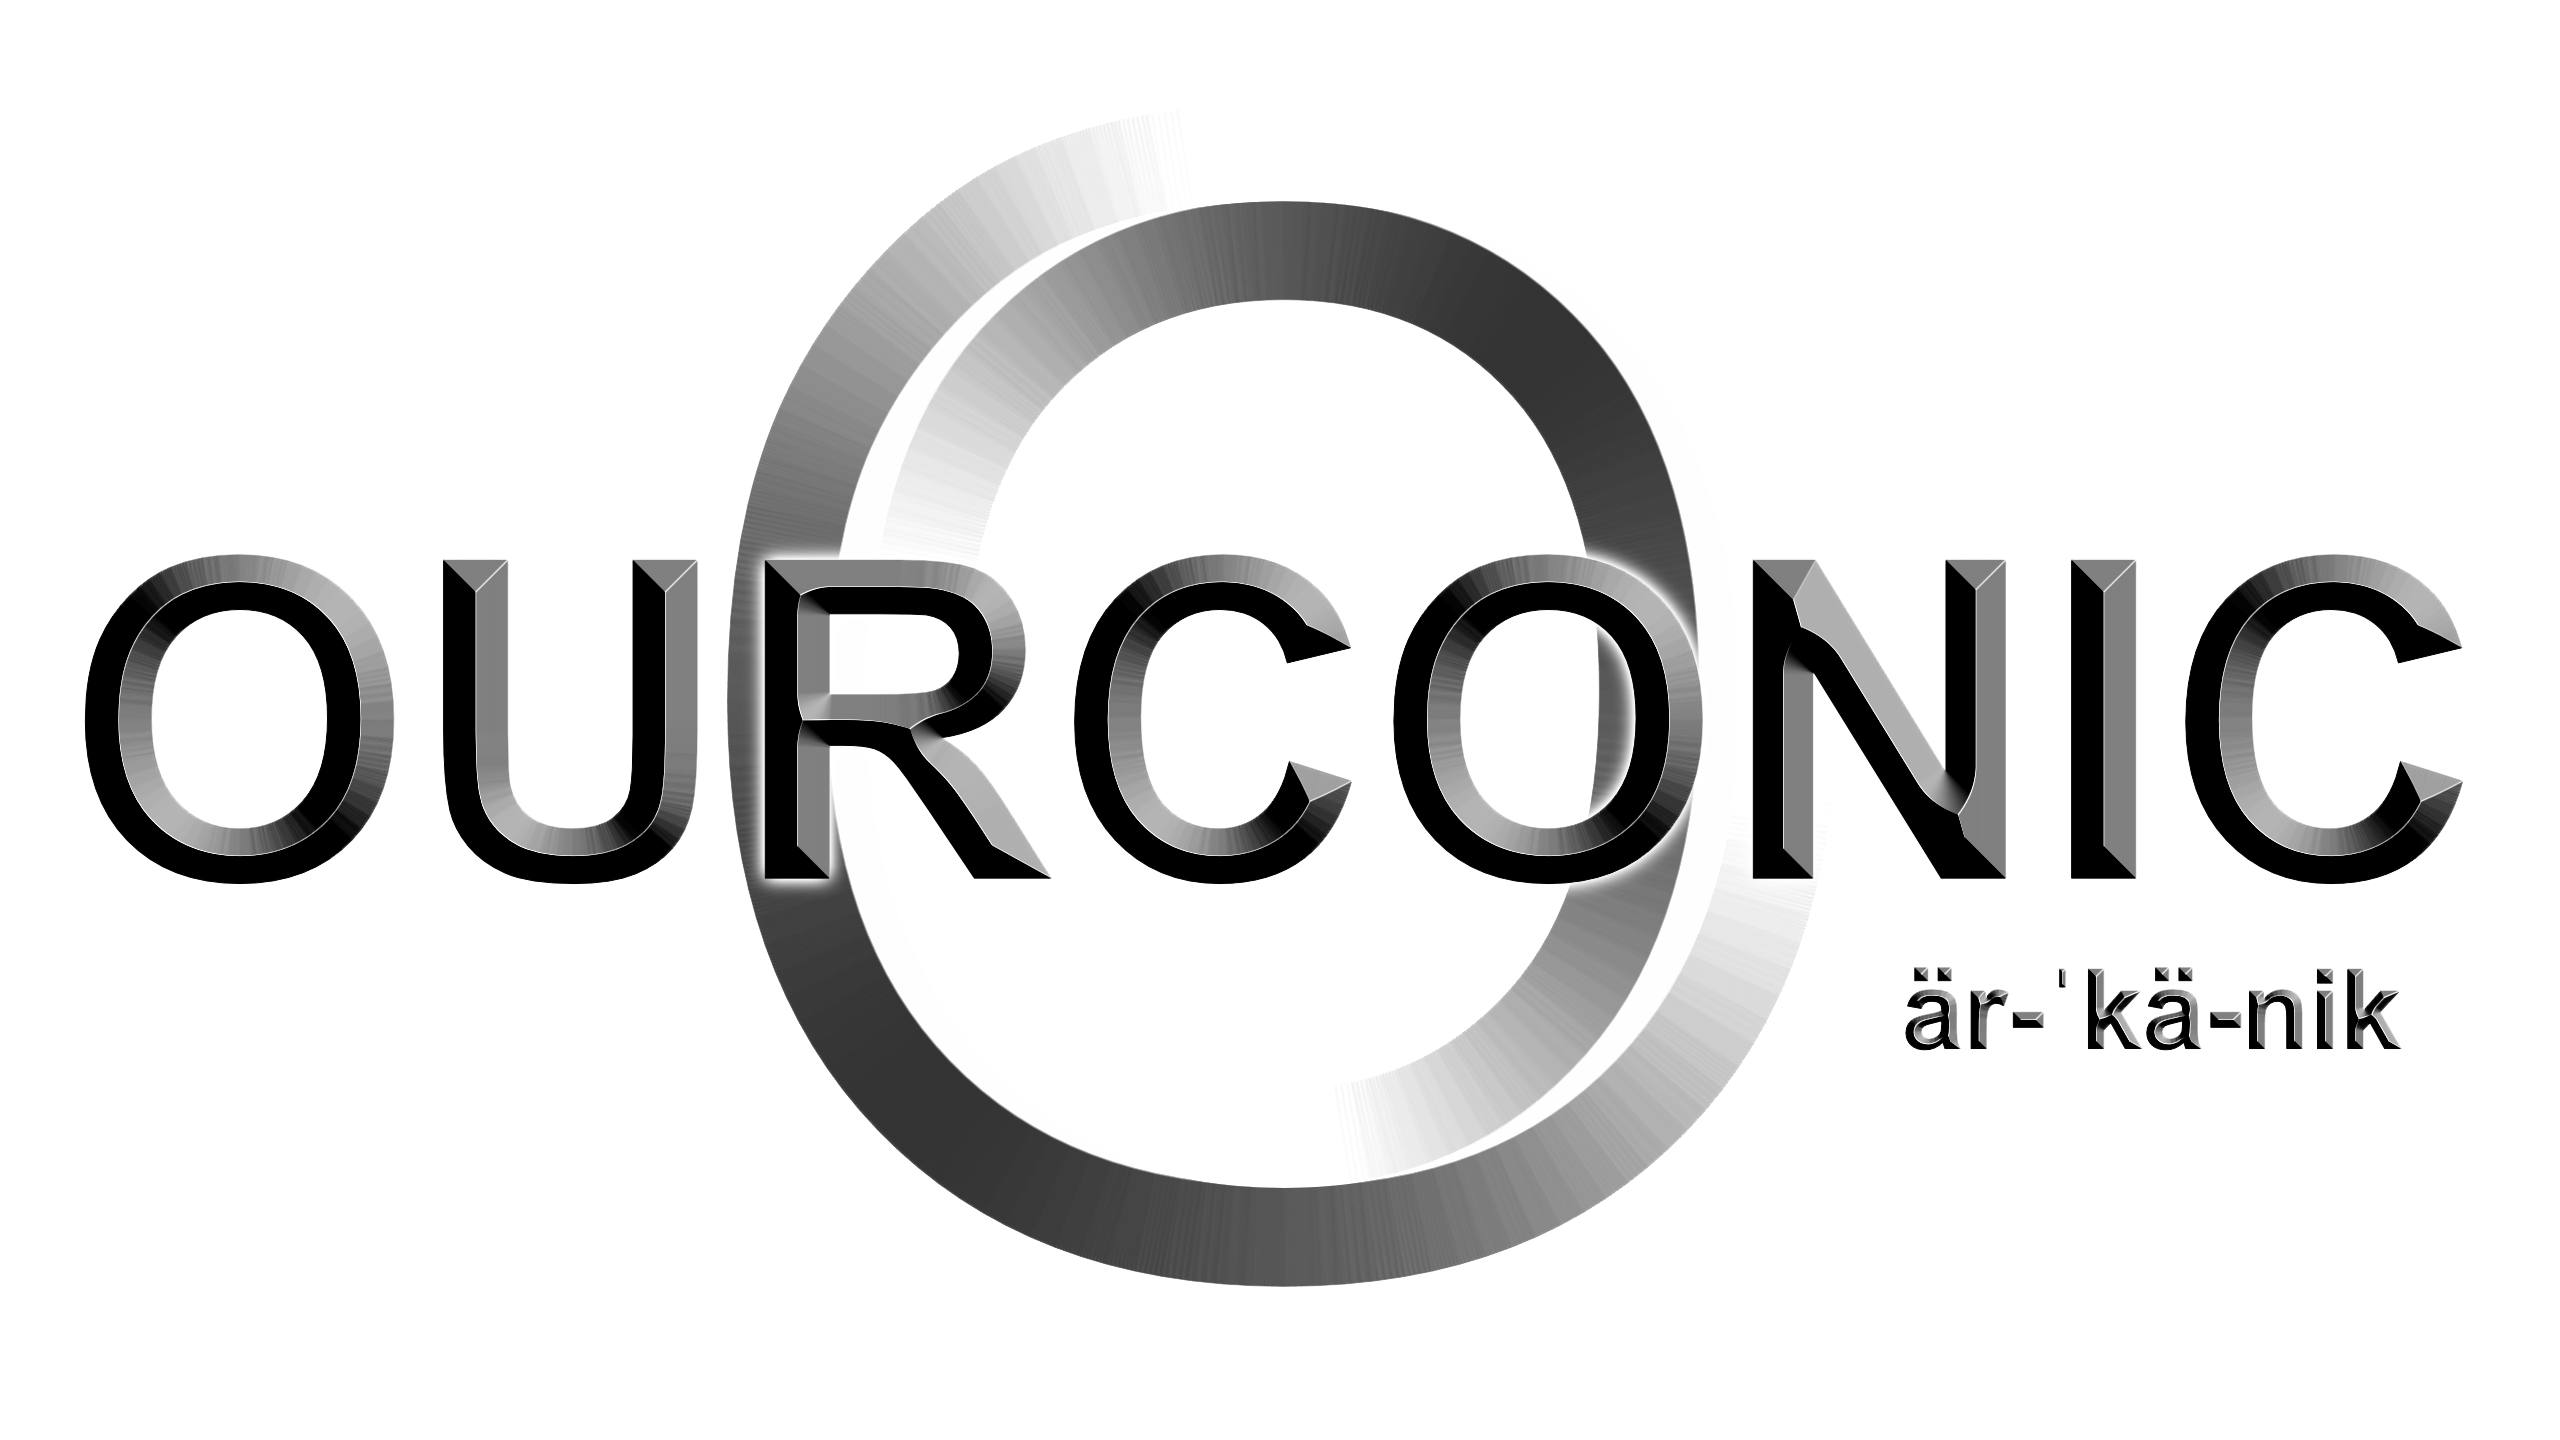 OURCONIC™